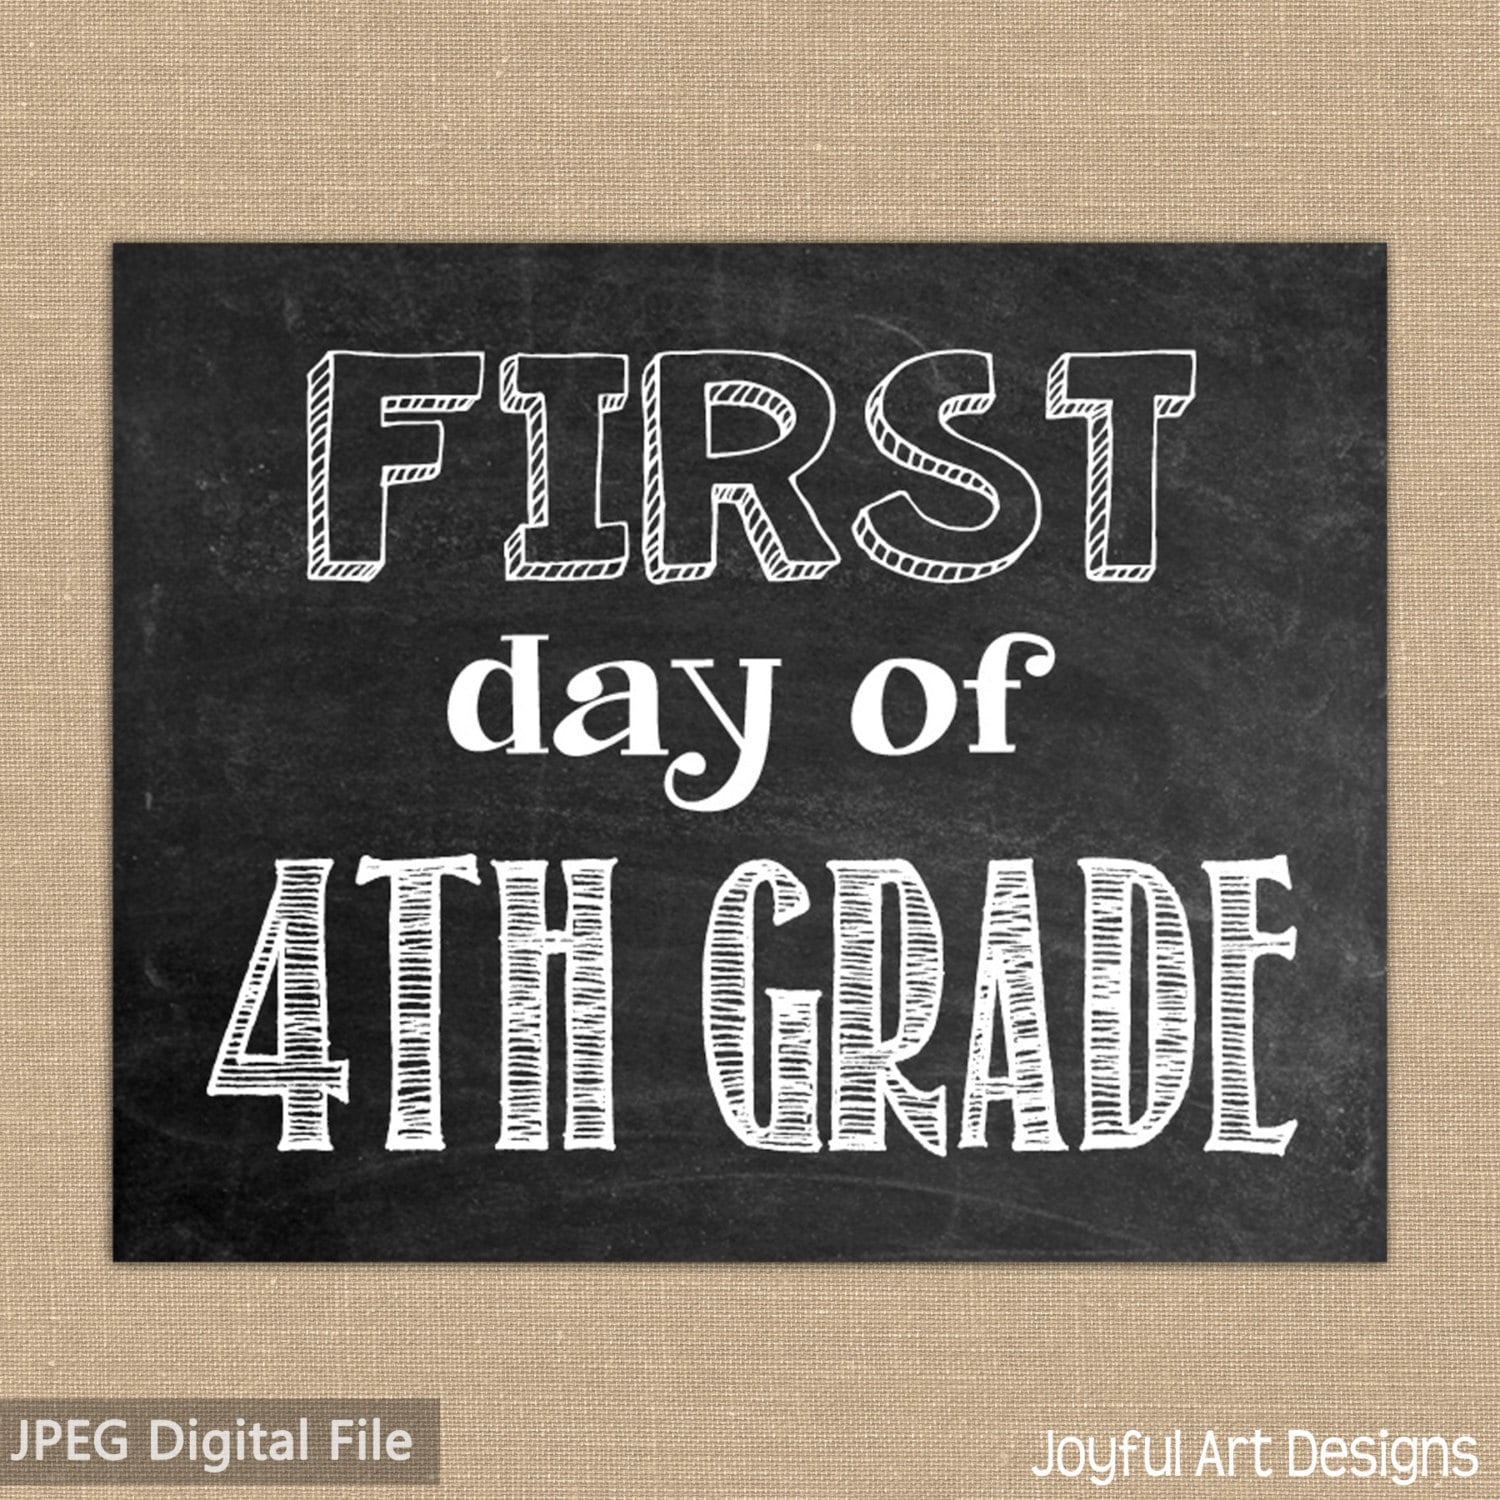 first-day-of-4th-grade-chalkboard-printable-sign-last-day-of